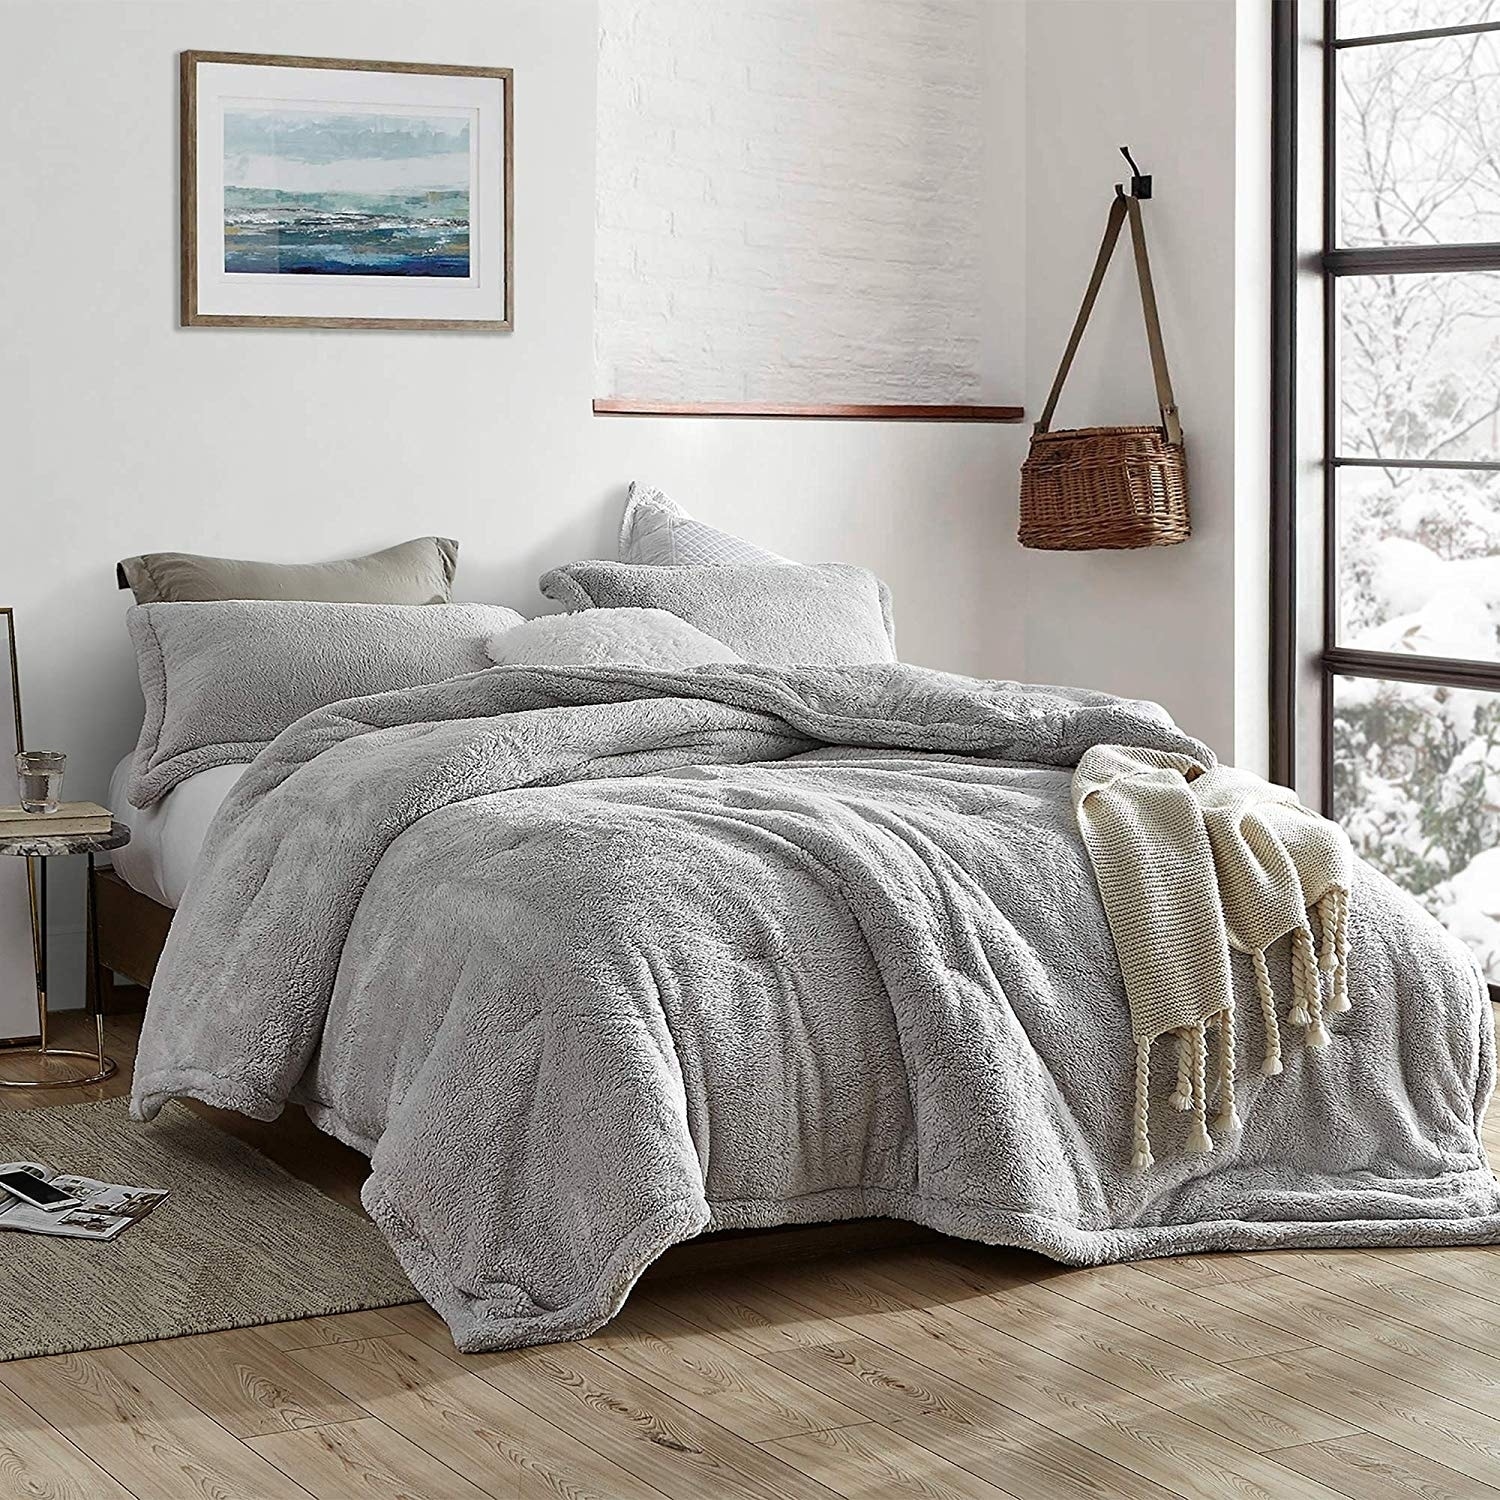 Coma Inducer® Comforter - Charcoal - Oversized Bedding